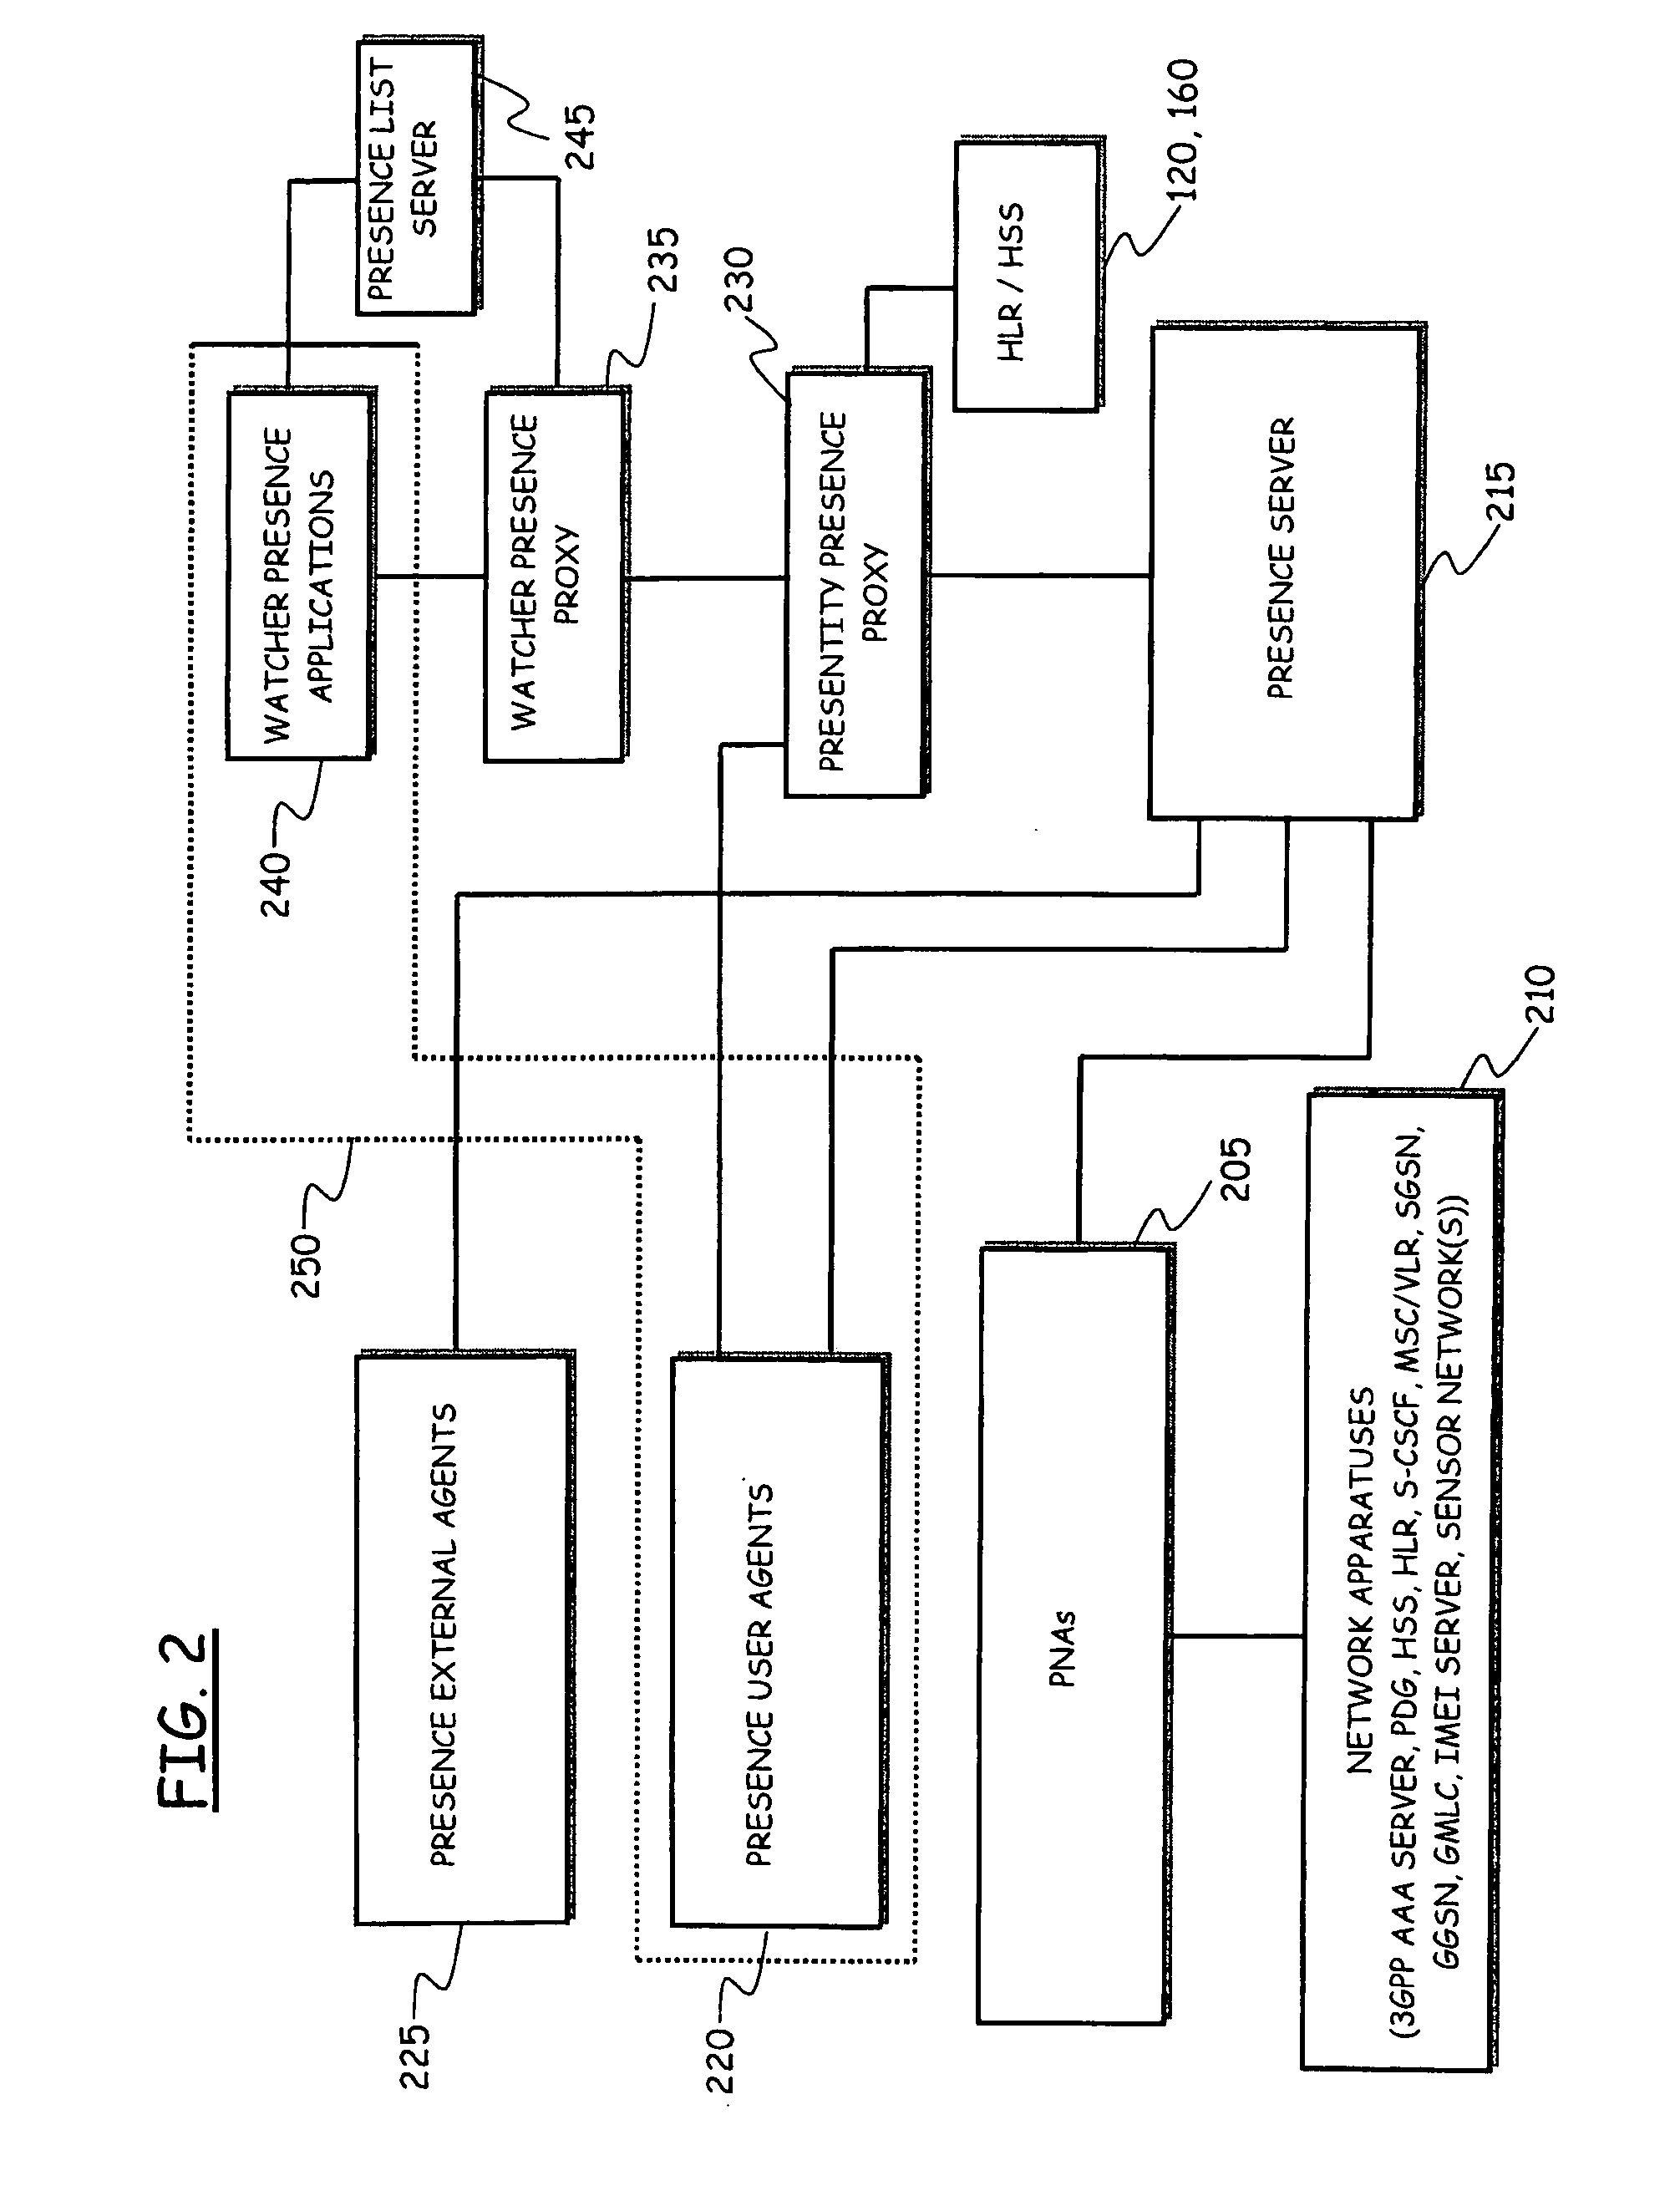 Method and System for Providing Presence Information